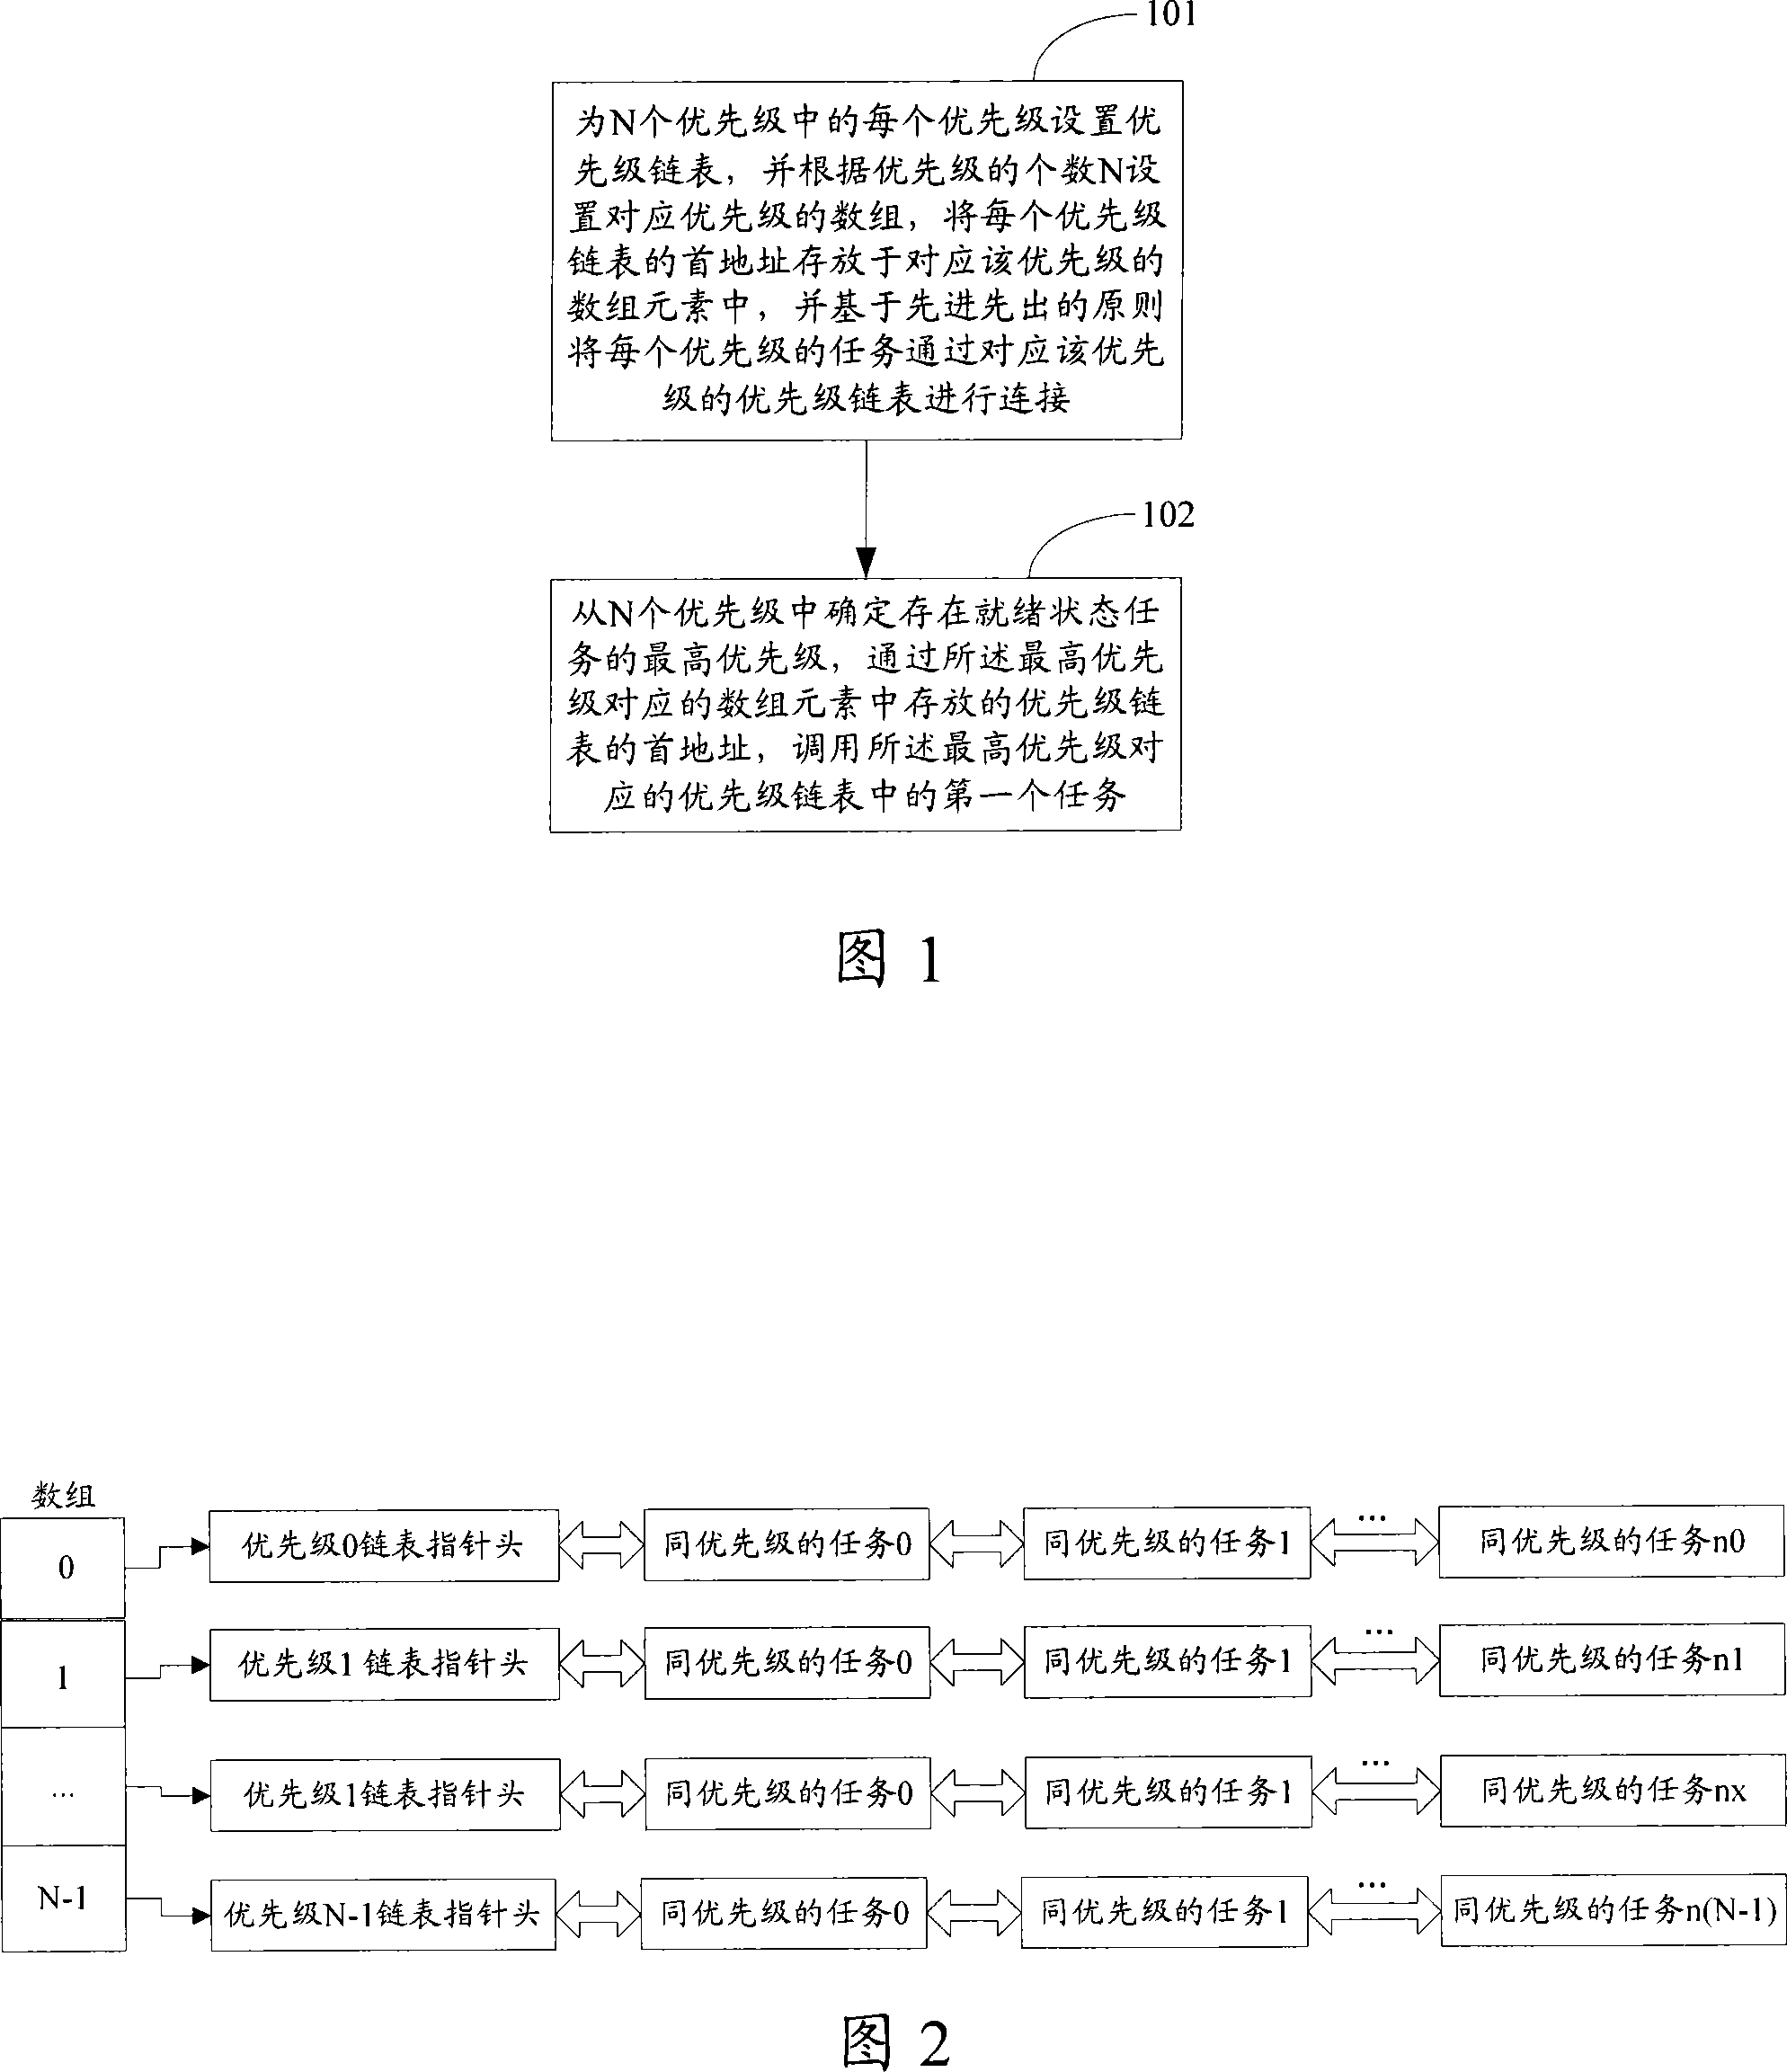 Task scheduling method and system in real-time operating system